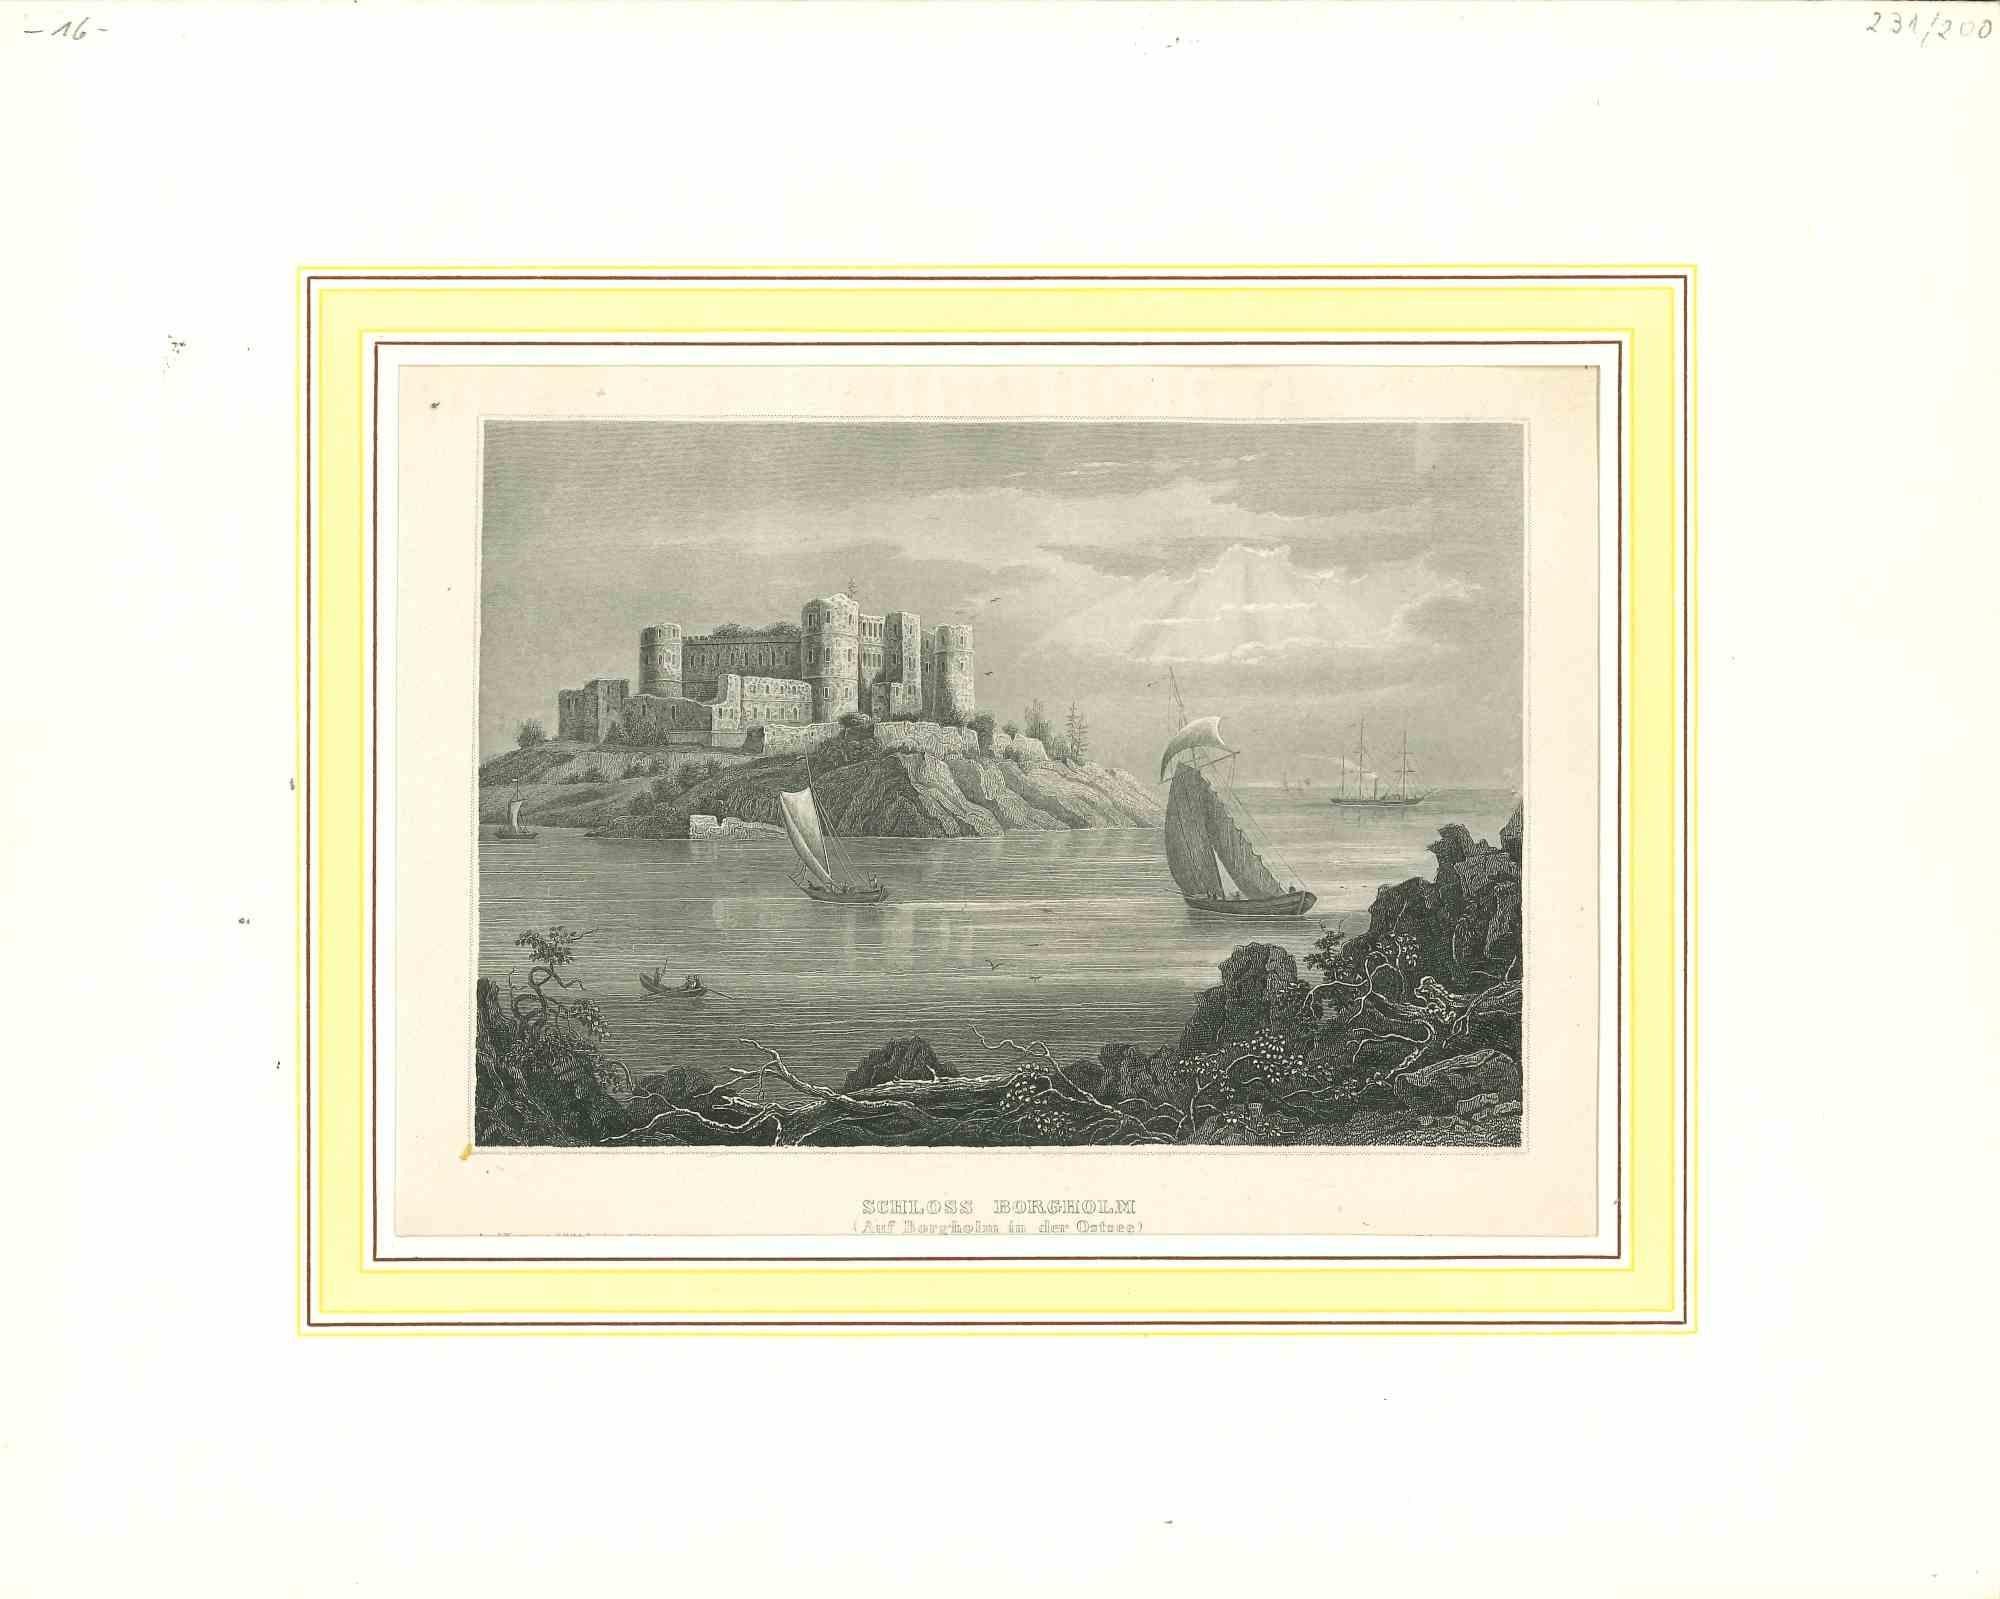 Unknown Landscape Print - Ancient View of Schloss Borgholm - Original Lithograph - Early 19th Century